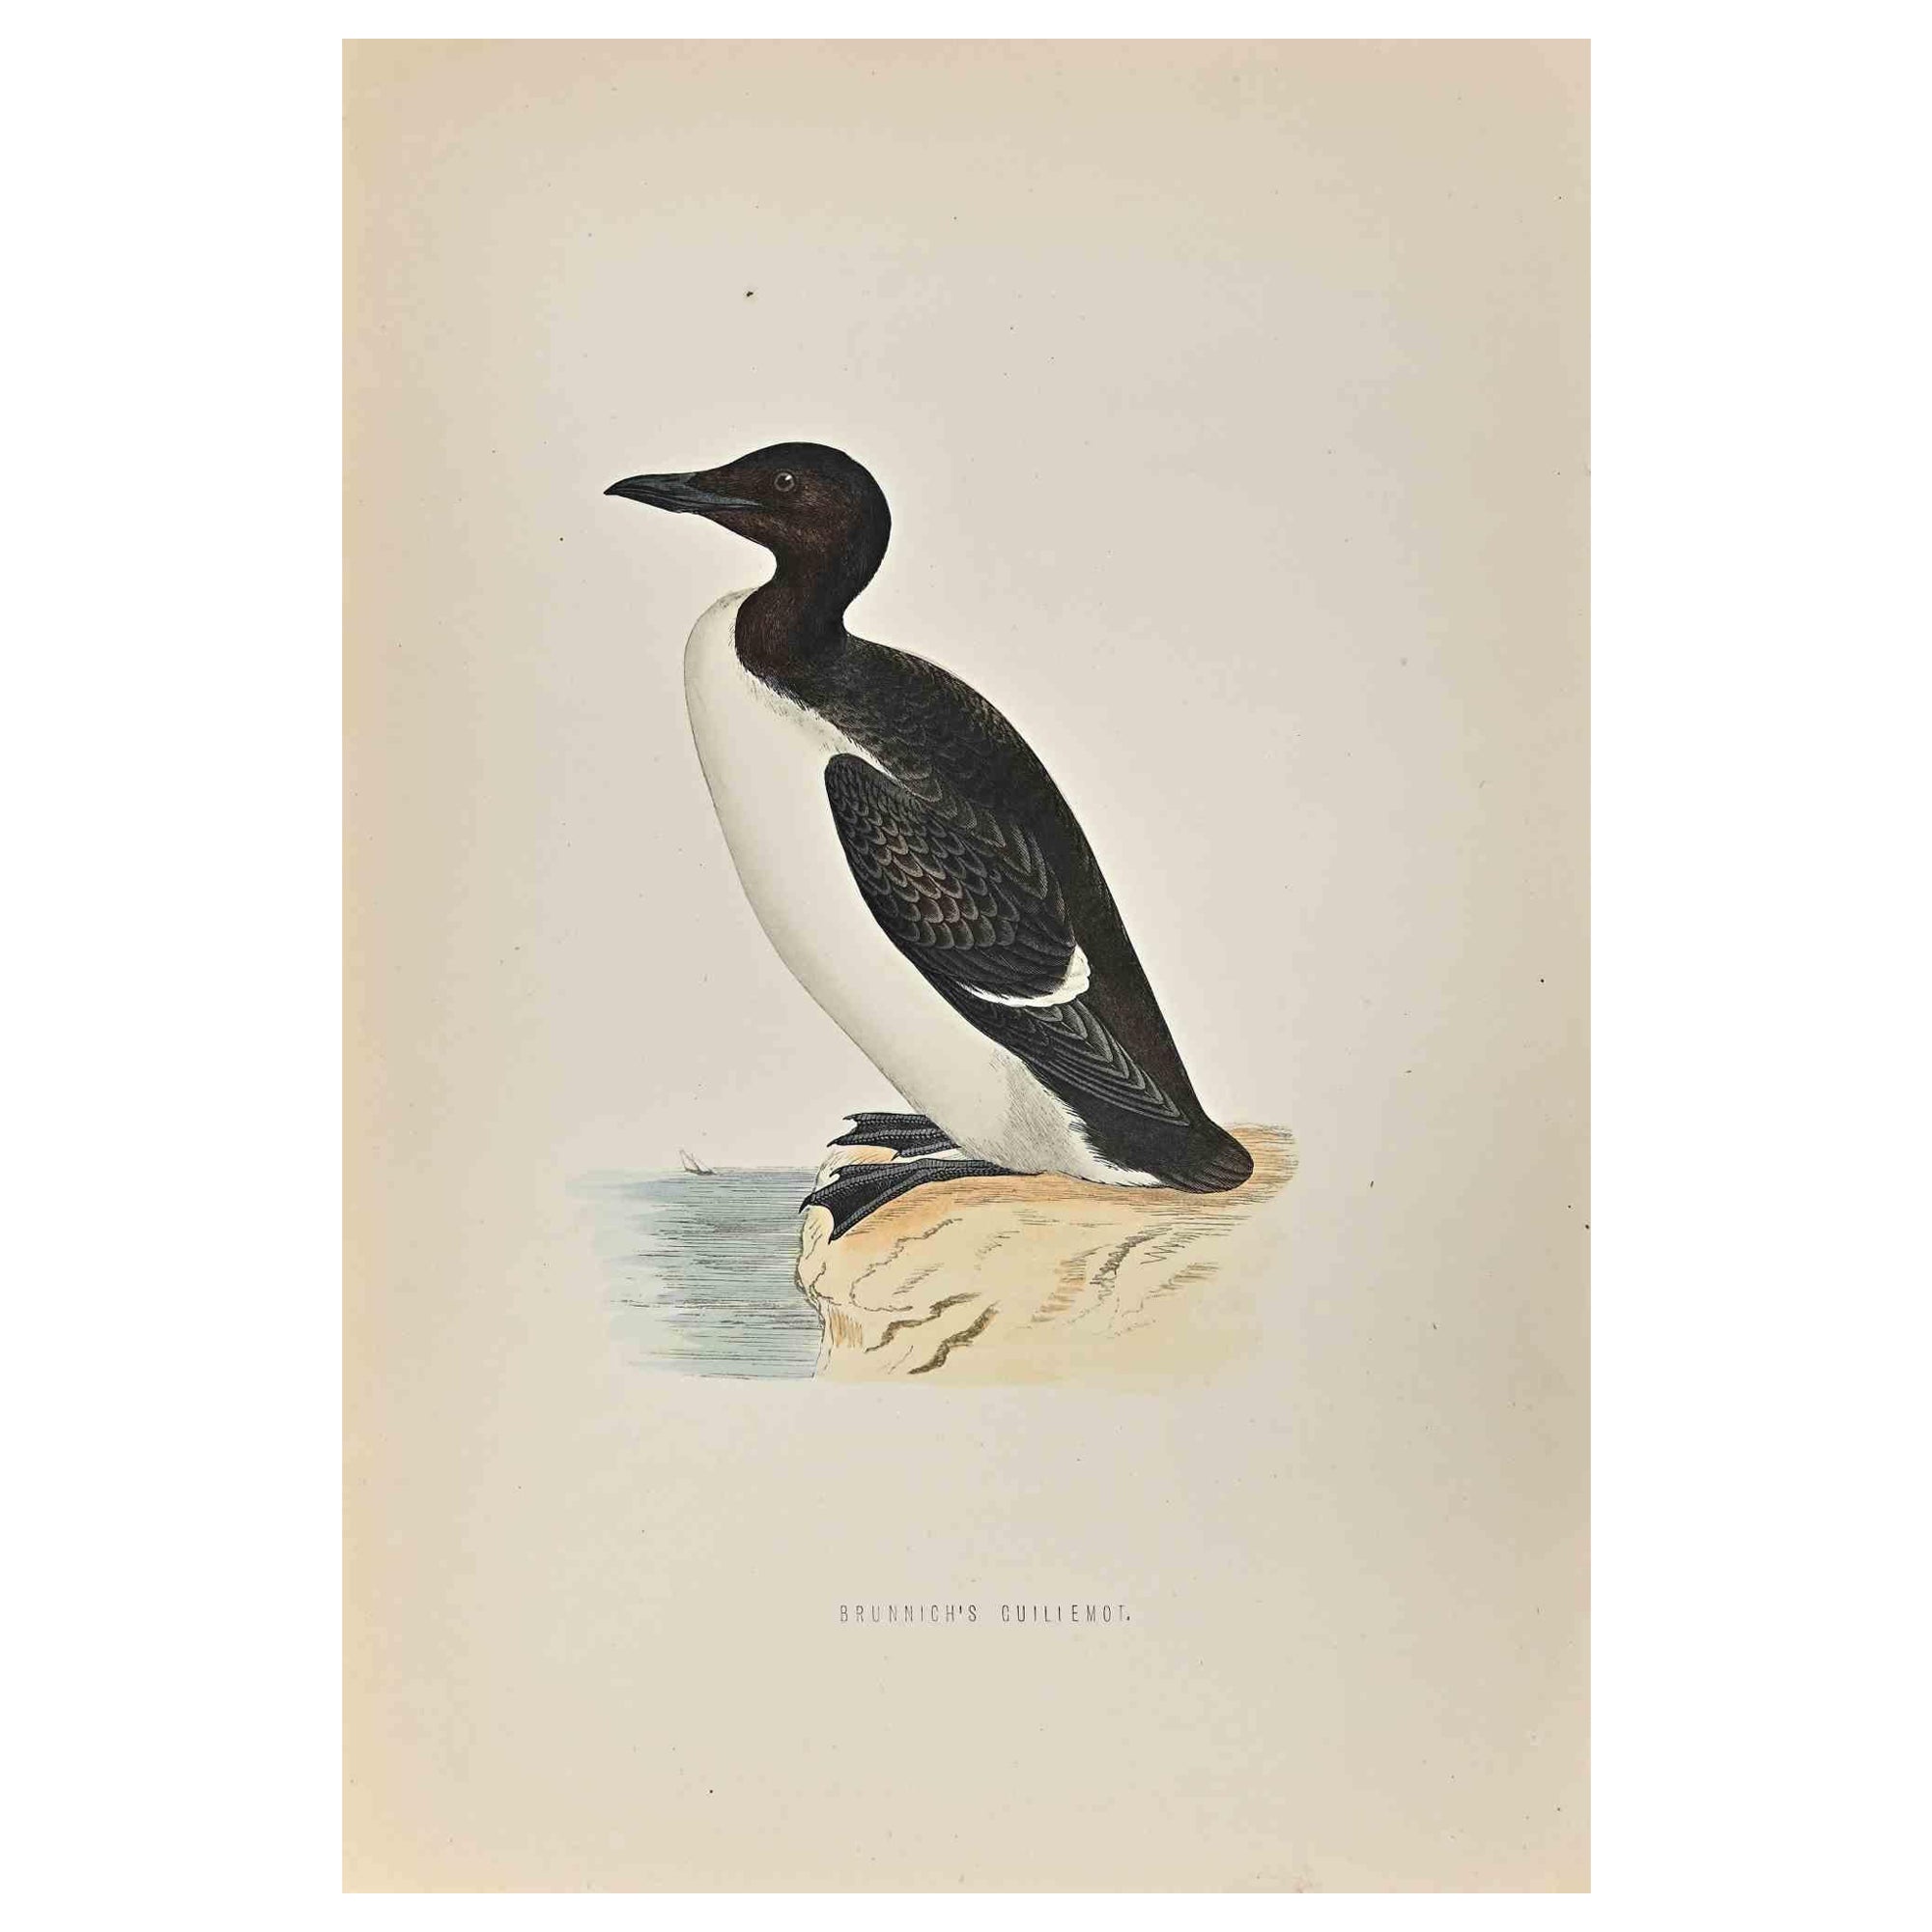 Brunnich's Guillemot is a modern artwork realized in 1870 by the British artist Alexander Francis Lydon (1836-1917) . 

Woodcut print, hand colored, published by London, Bell & Sons, 1870.  Name of the bird printed in plate. This work is part of a